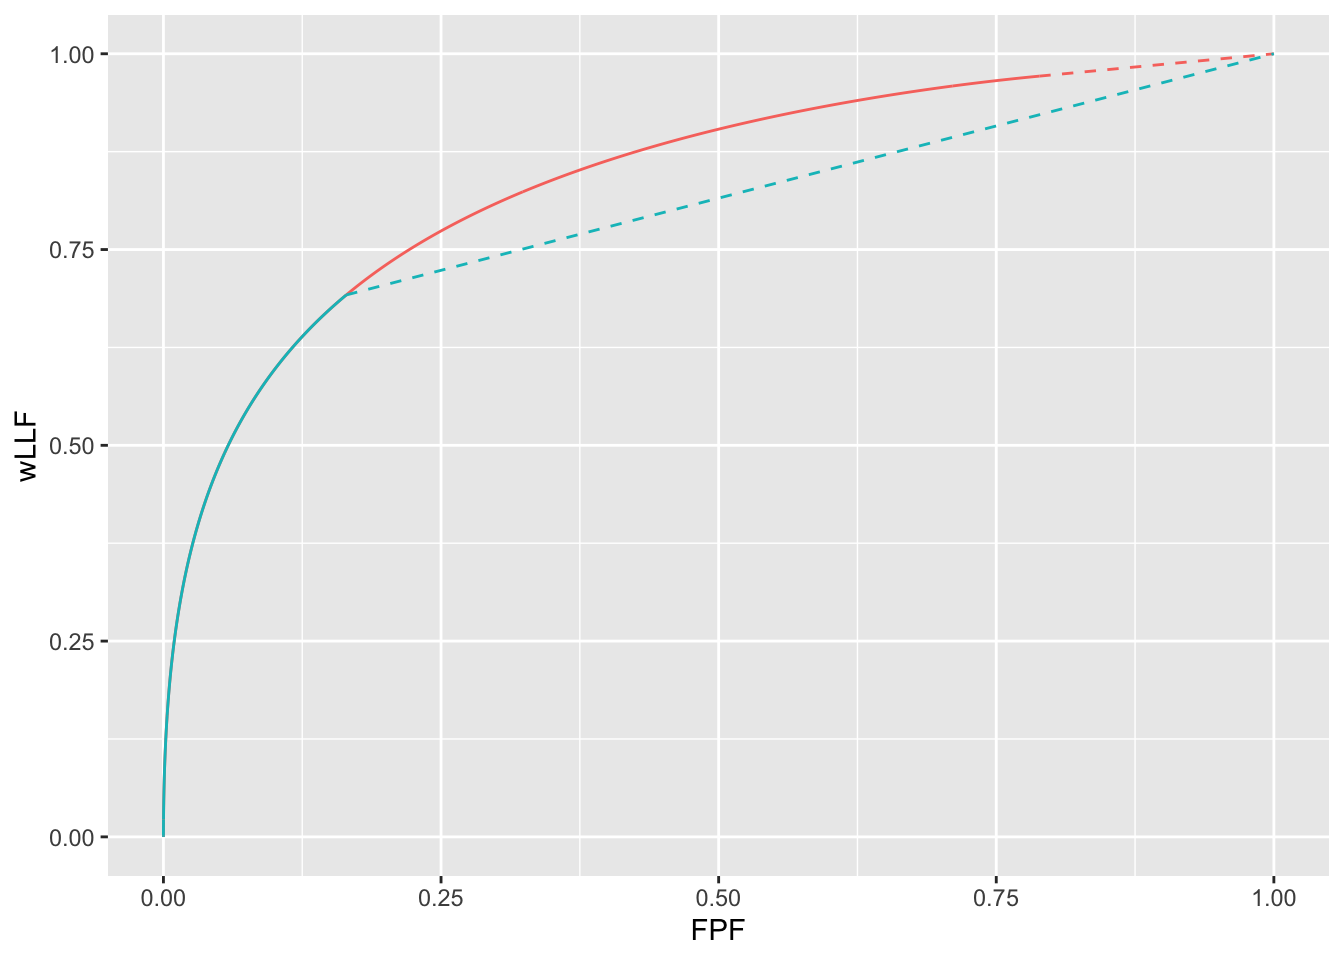 wAFROC curves for wAFROC-AUC and Youden-index based optimizations: both curves correspond to $\mu = 2$, $\lambda = 5$ and $\nu = 2$. The optimal reporting theshold $\zeta_1$ is determined by the selected FOM. The red curve corresponds to FOM = wAFROC-AUC and the blue curve corresponds to FOM = Youden-index. The stricter reporting threshold found by the Youden-index based method sacrifices a considerable amount of area under the wAFROC.  The two wAFROC-AUCs are 0.841 and 0.793, respectively.